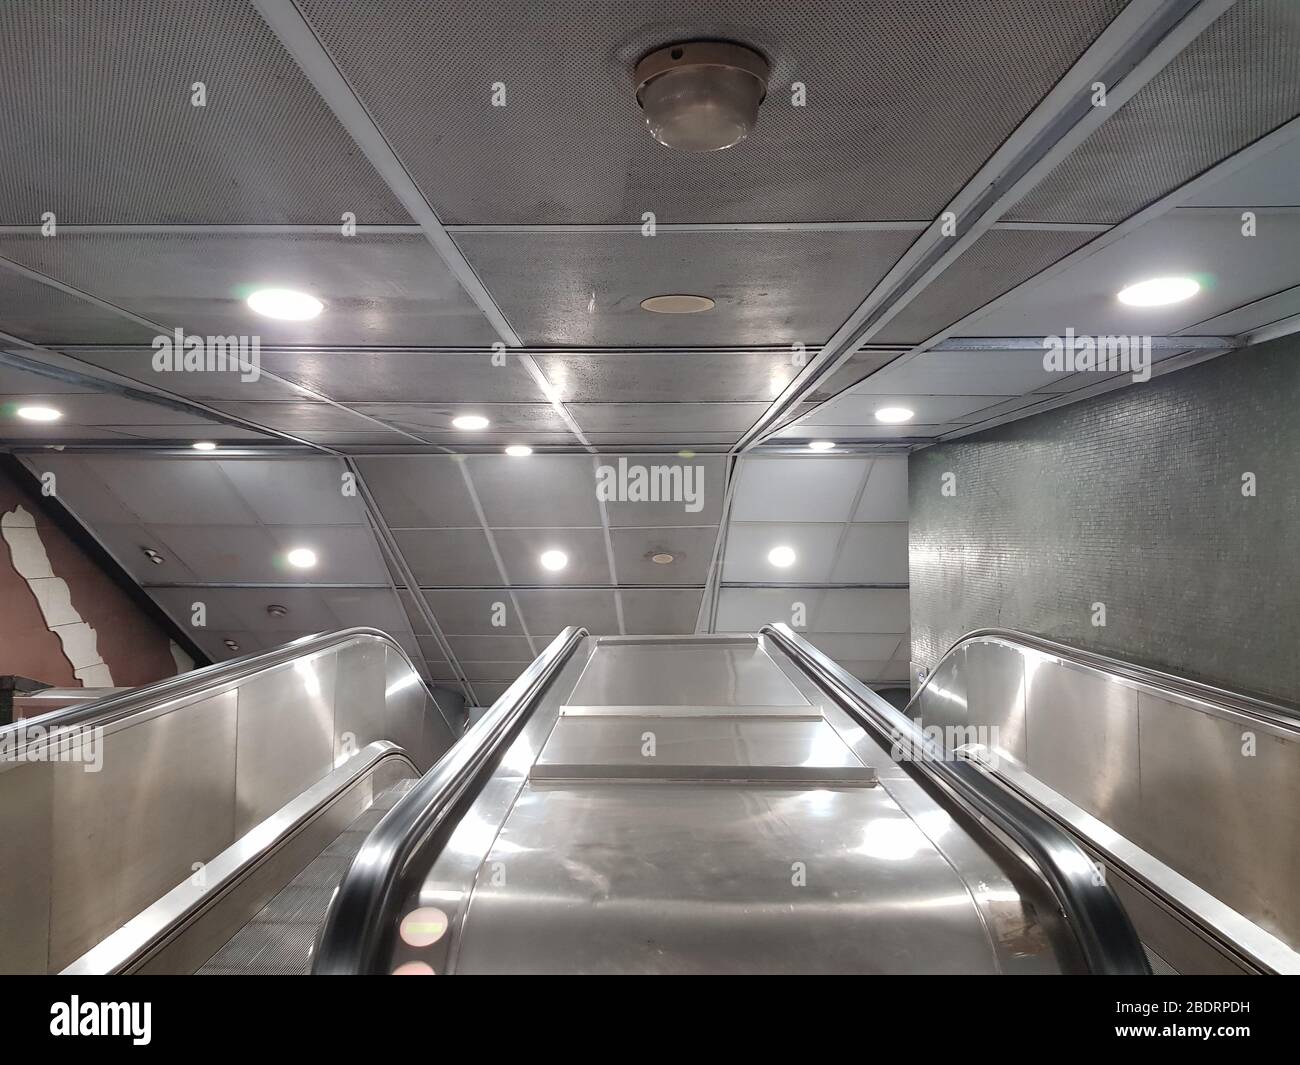 Entrance of moving escalator on subway station with no people Stock Photo